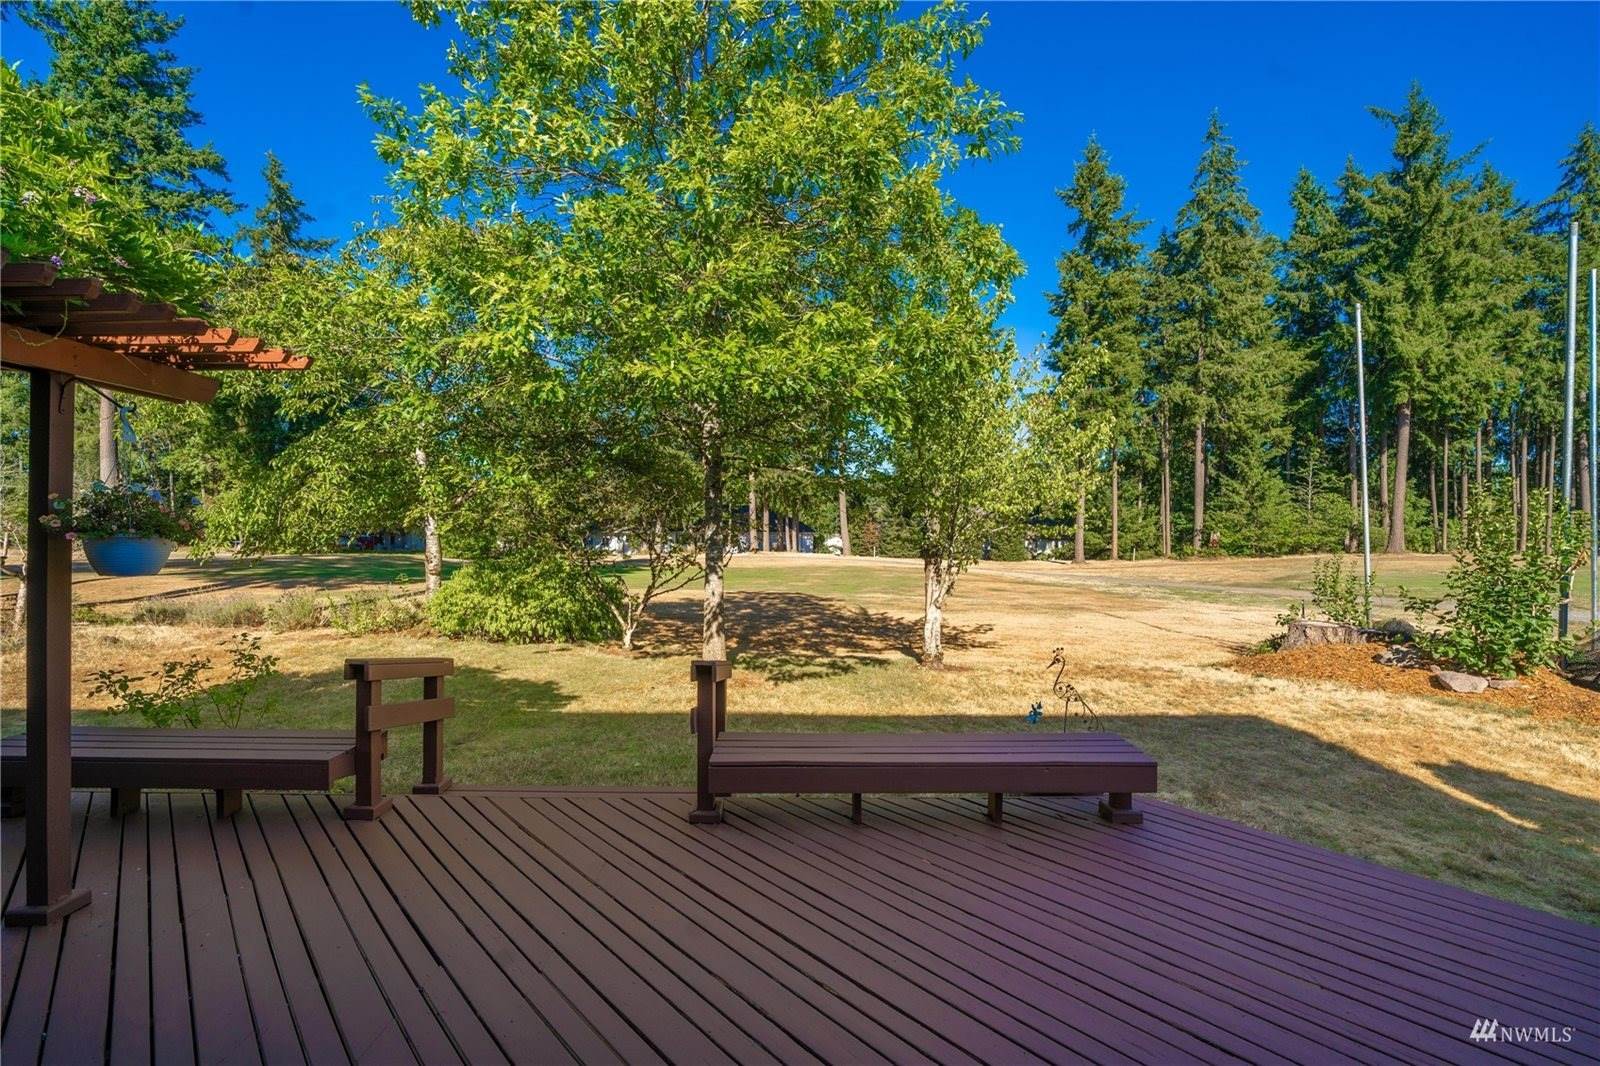 26018 Lake Wilderness Country club Drive SE, Maple Valley, WA 98038